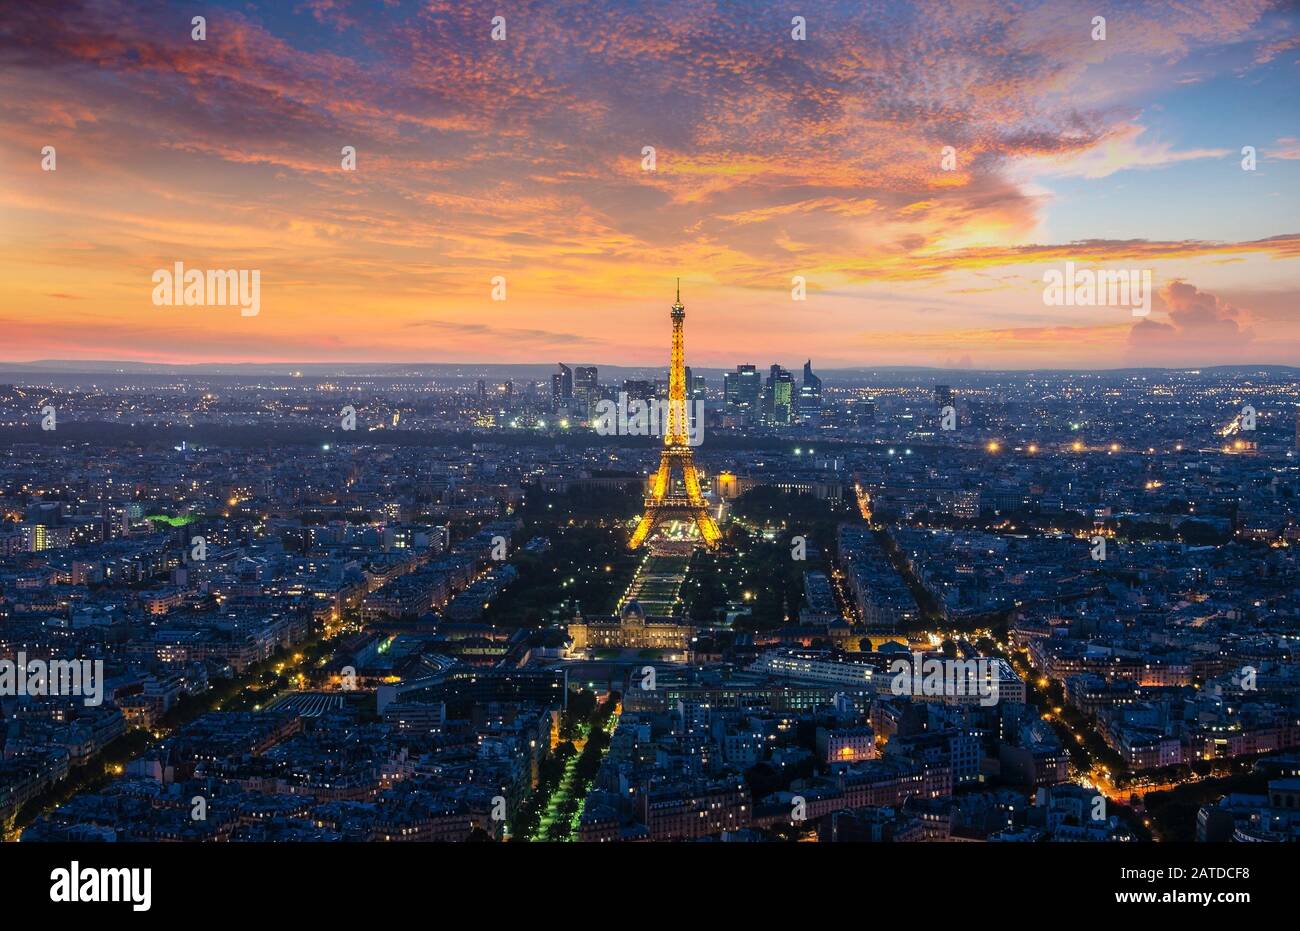 PARIS, FRANCE - SEPTEMBER 17, 2015: Evening view on Paris and the Eiffel Tower. Stock Photo